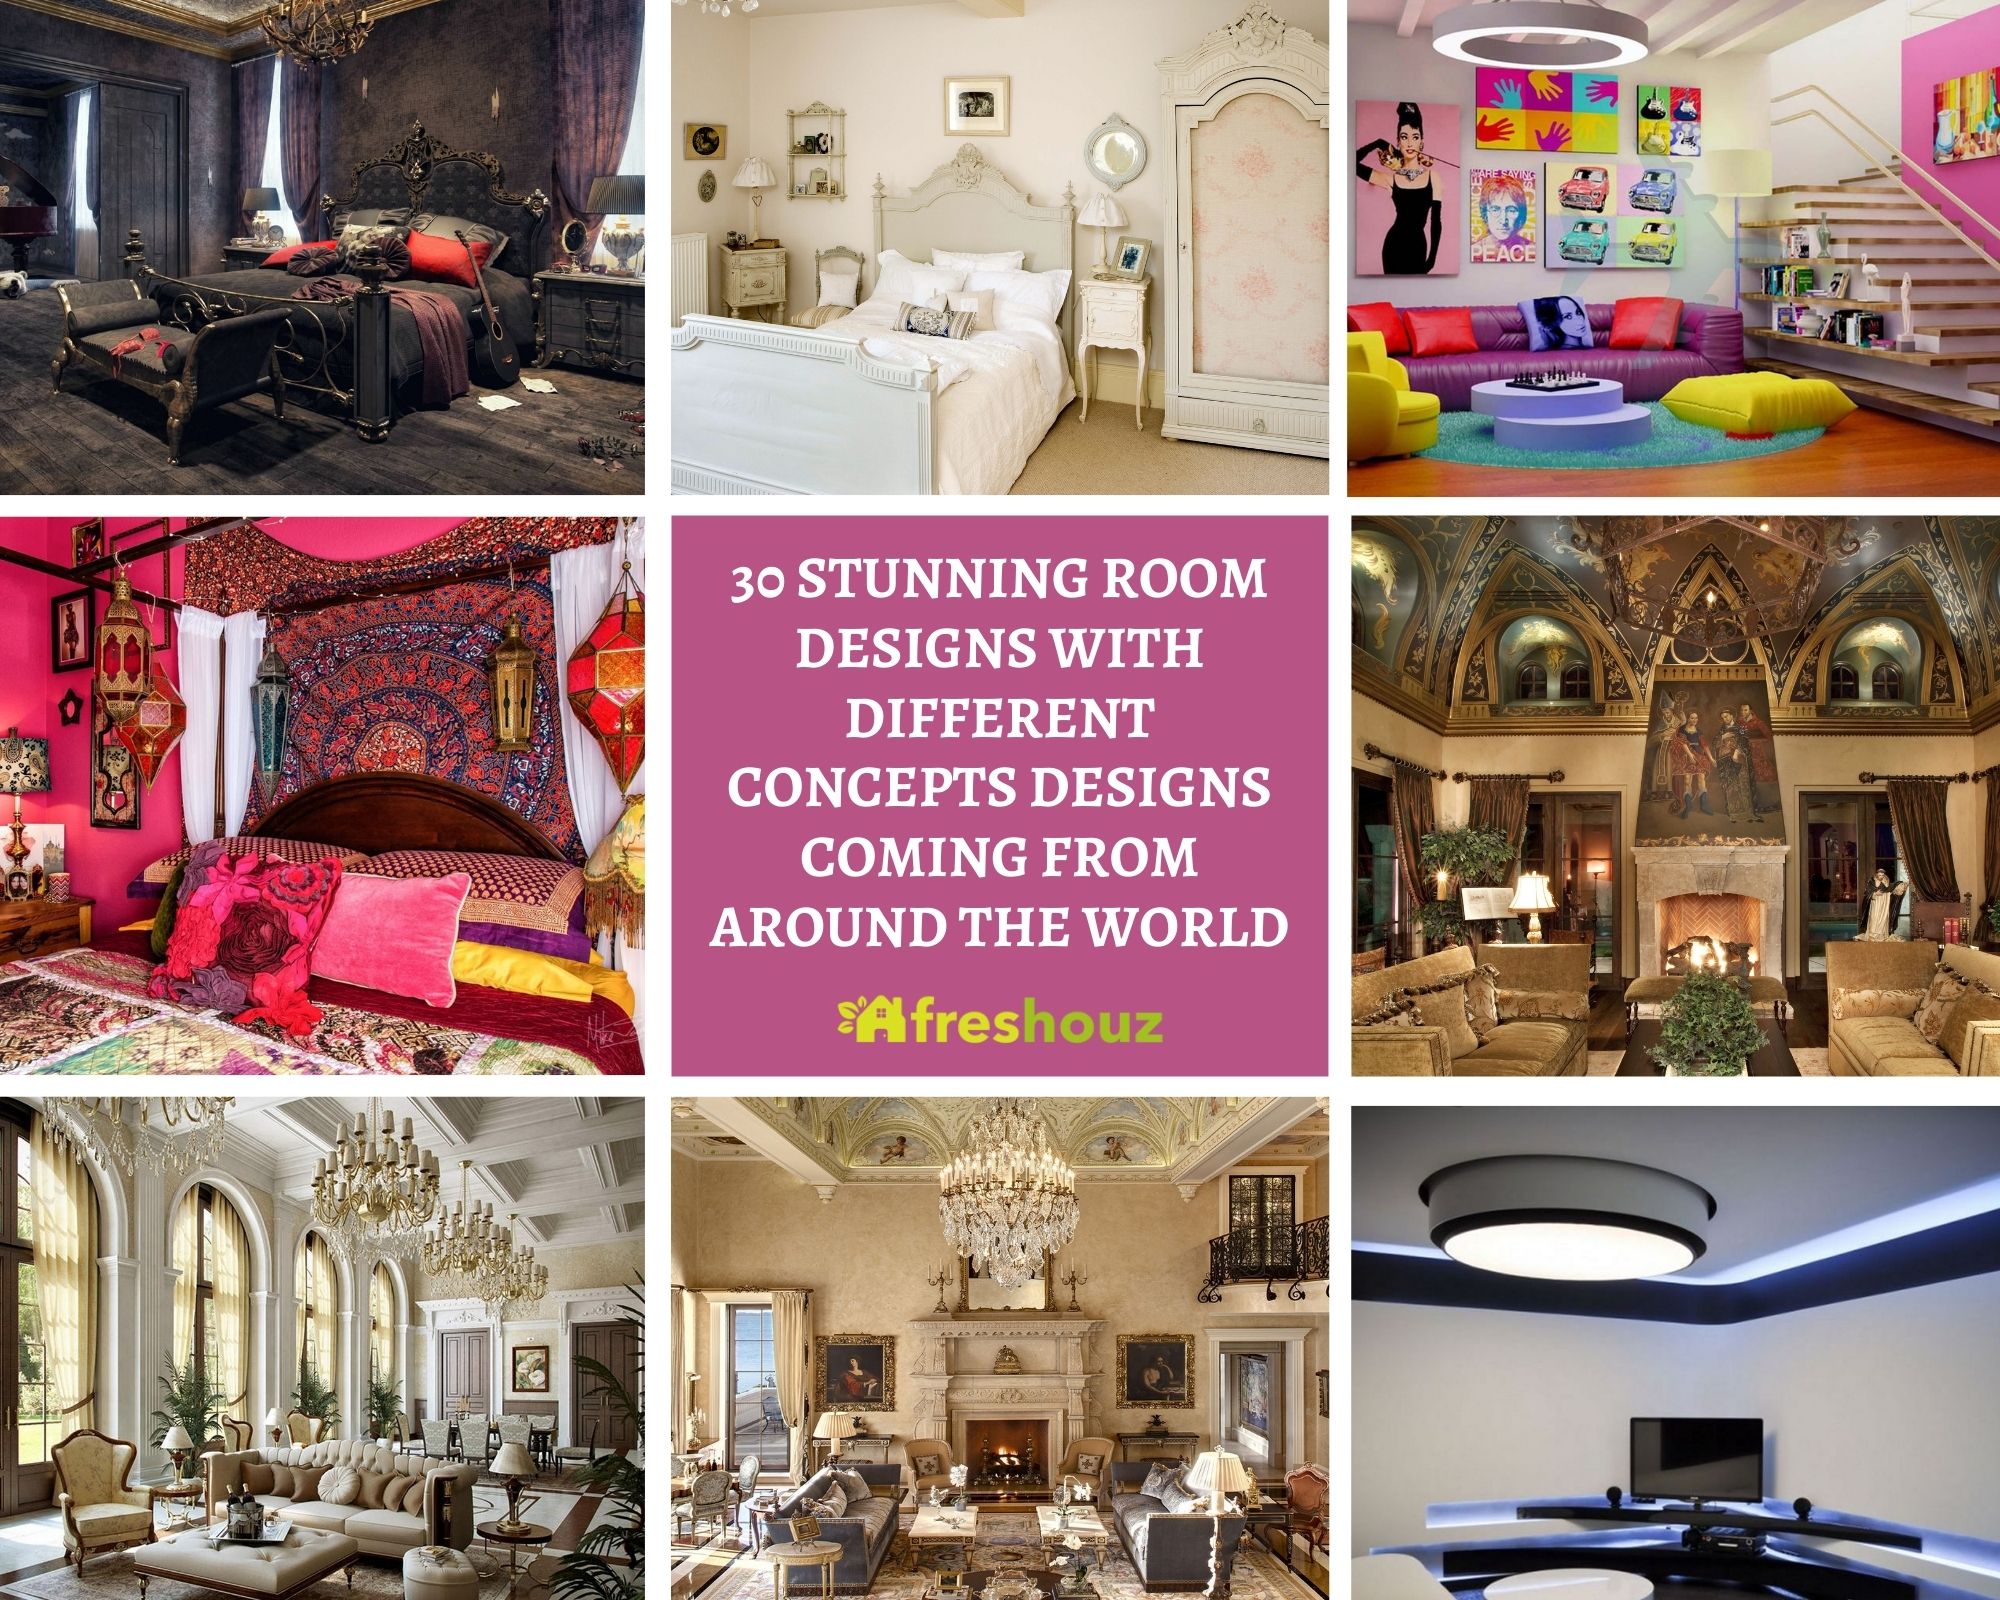 30 Stunning Room Designs With Different Concepts Designs Coming From Around The World